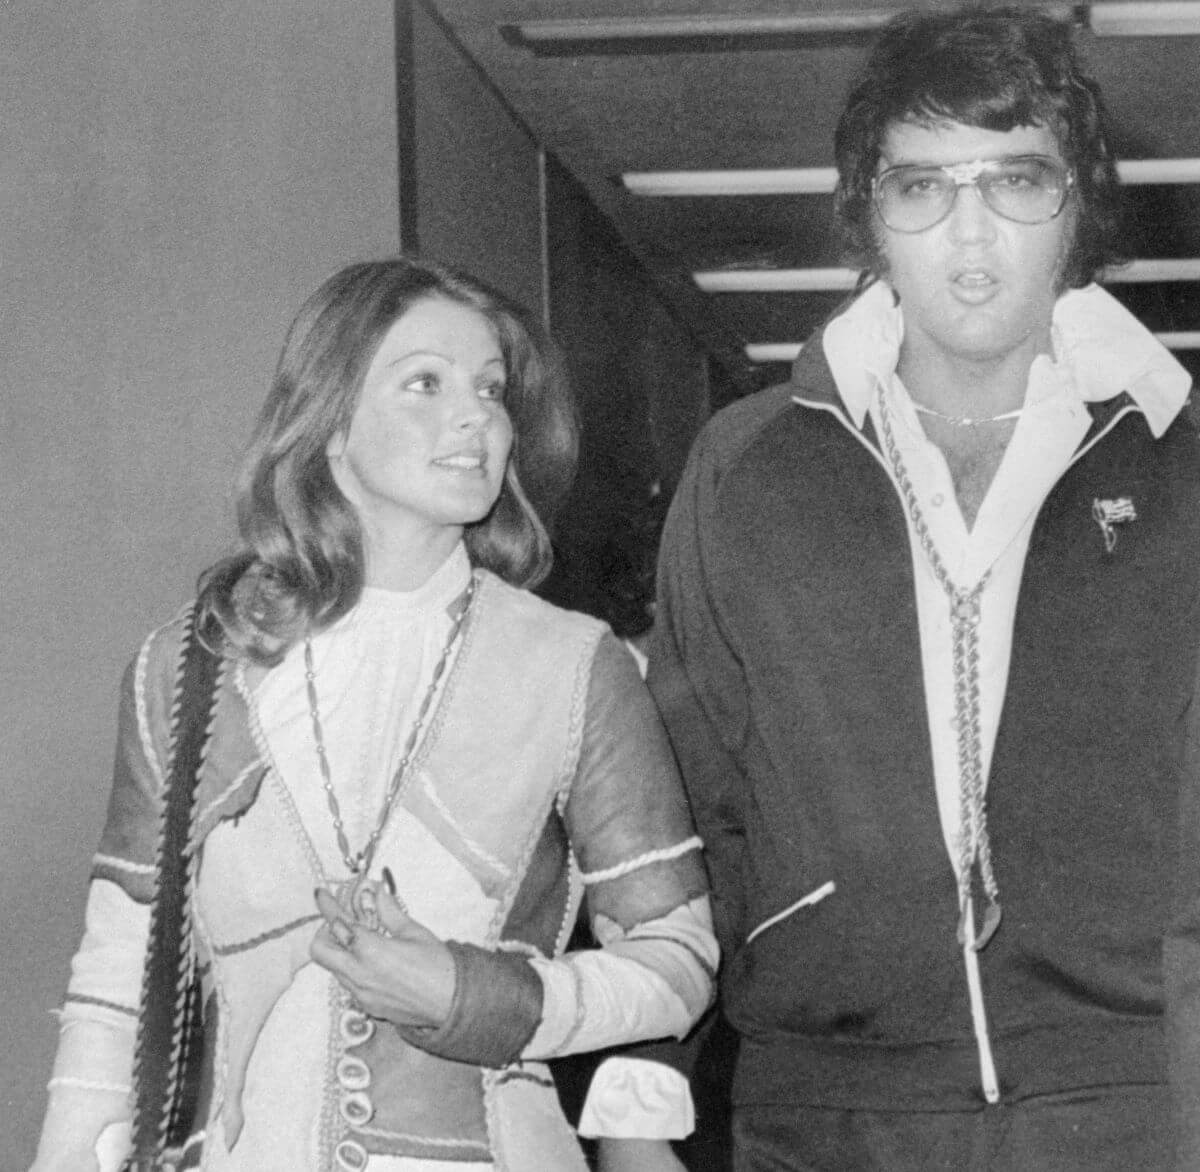 A black and white picture of Priscilla and Elvis Presley leaving a courthouse together.